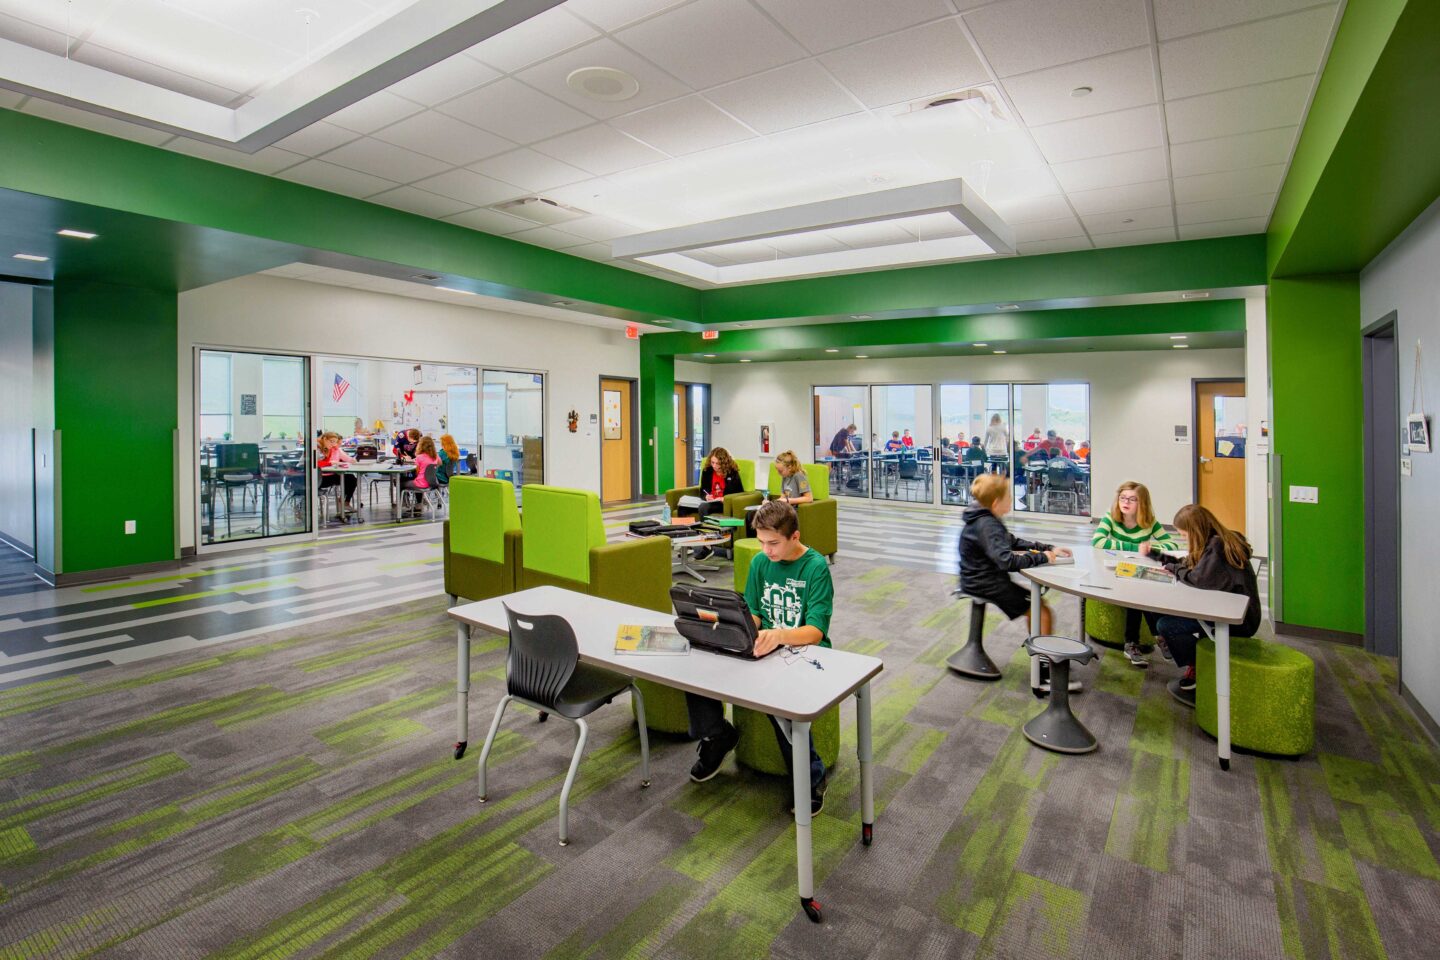 The "green-themed" resource area that serves several adjacent classrooms and is accessible through sliding glass doors